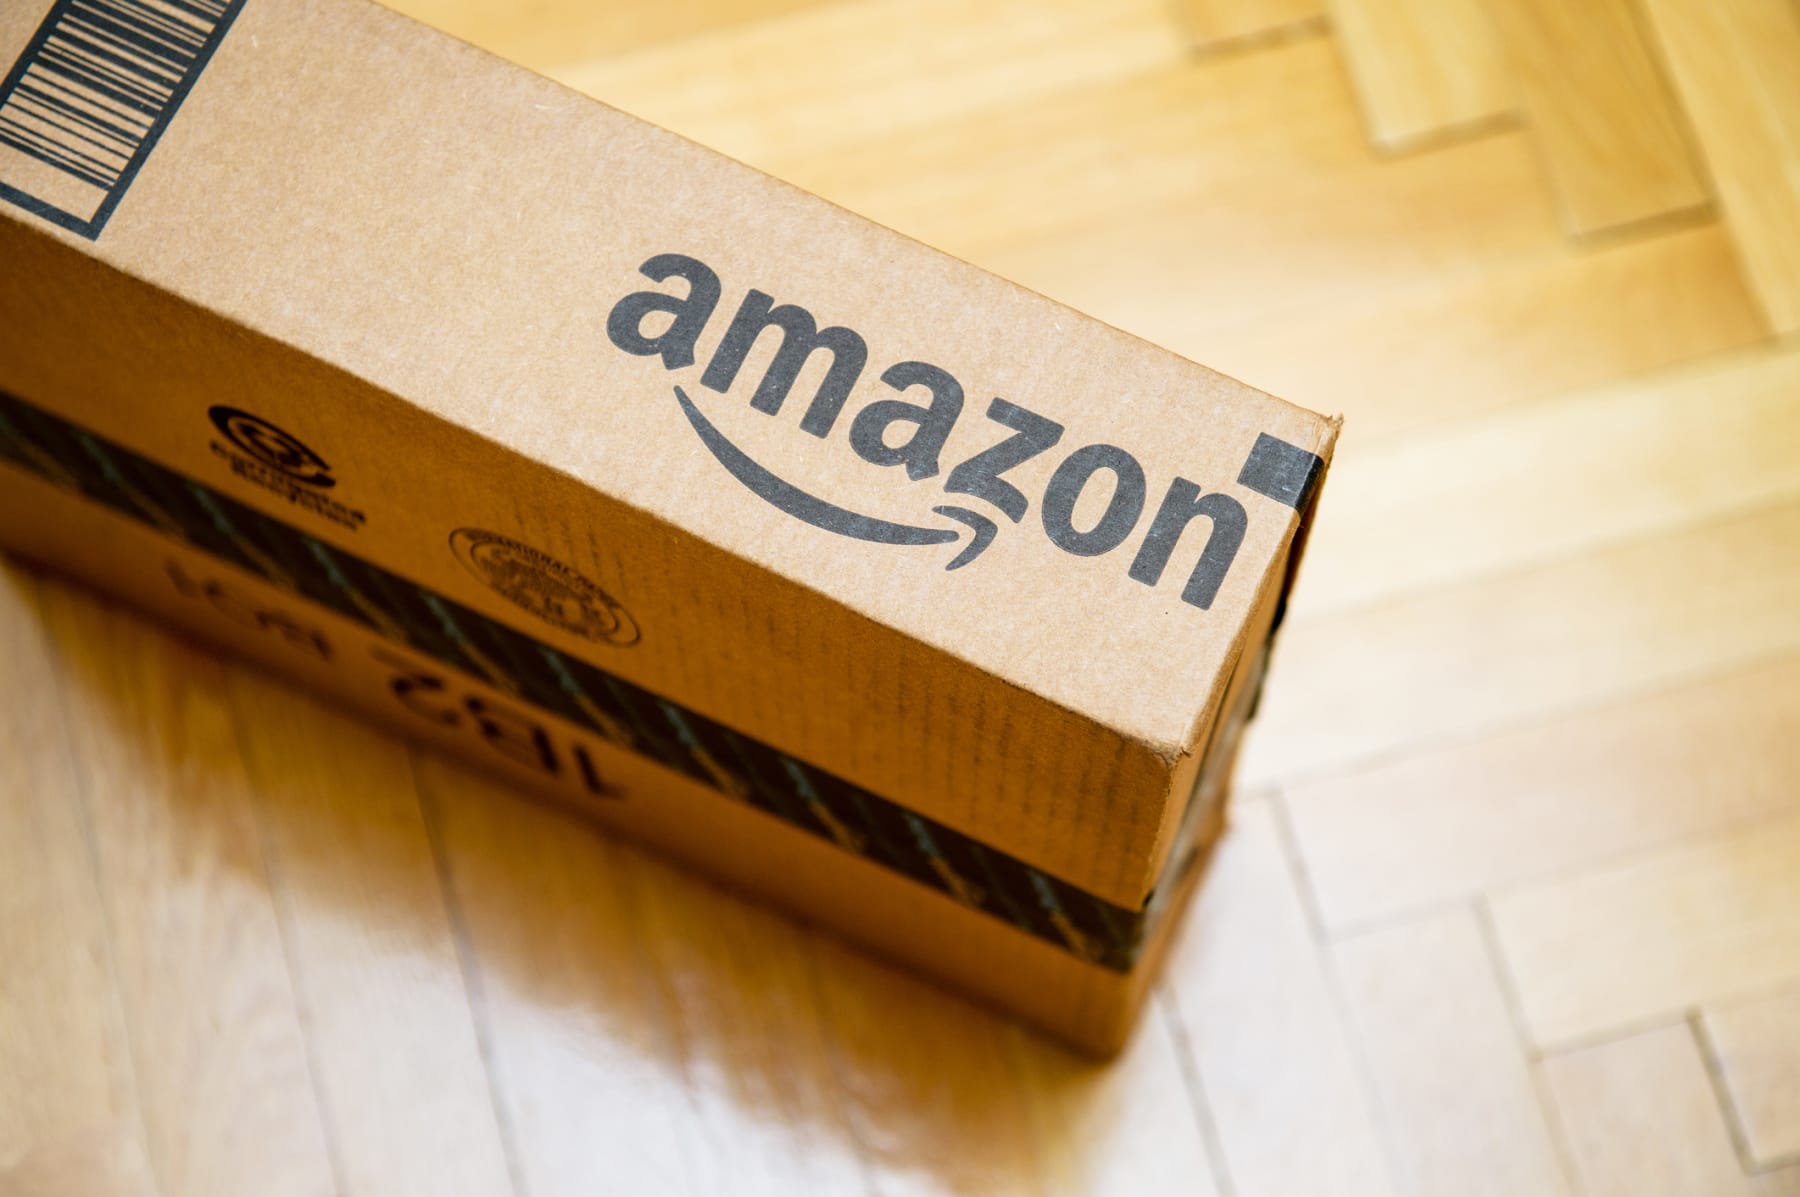 How to Send a Gift to Someone on Amazon Without Knowing Their Address